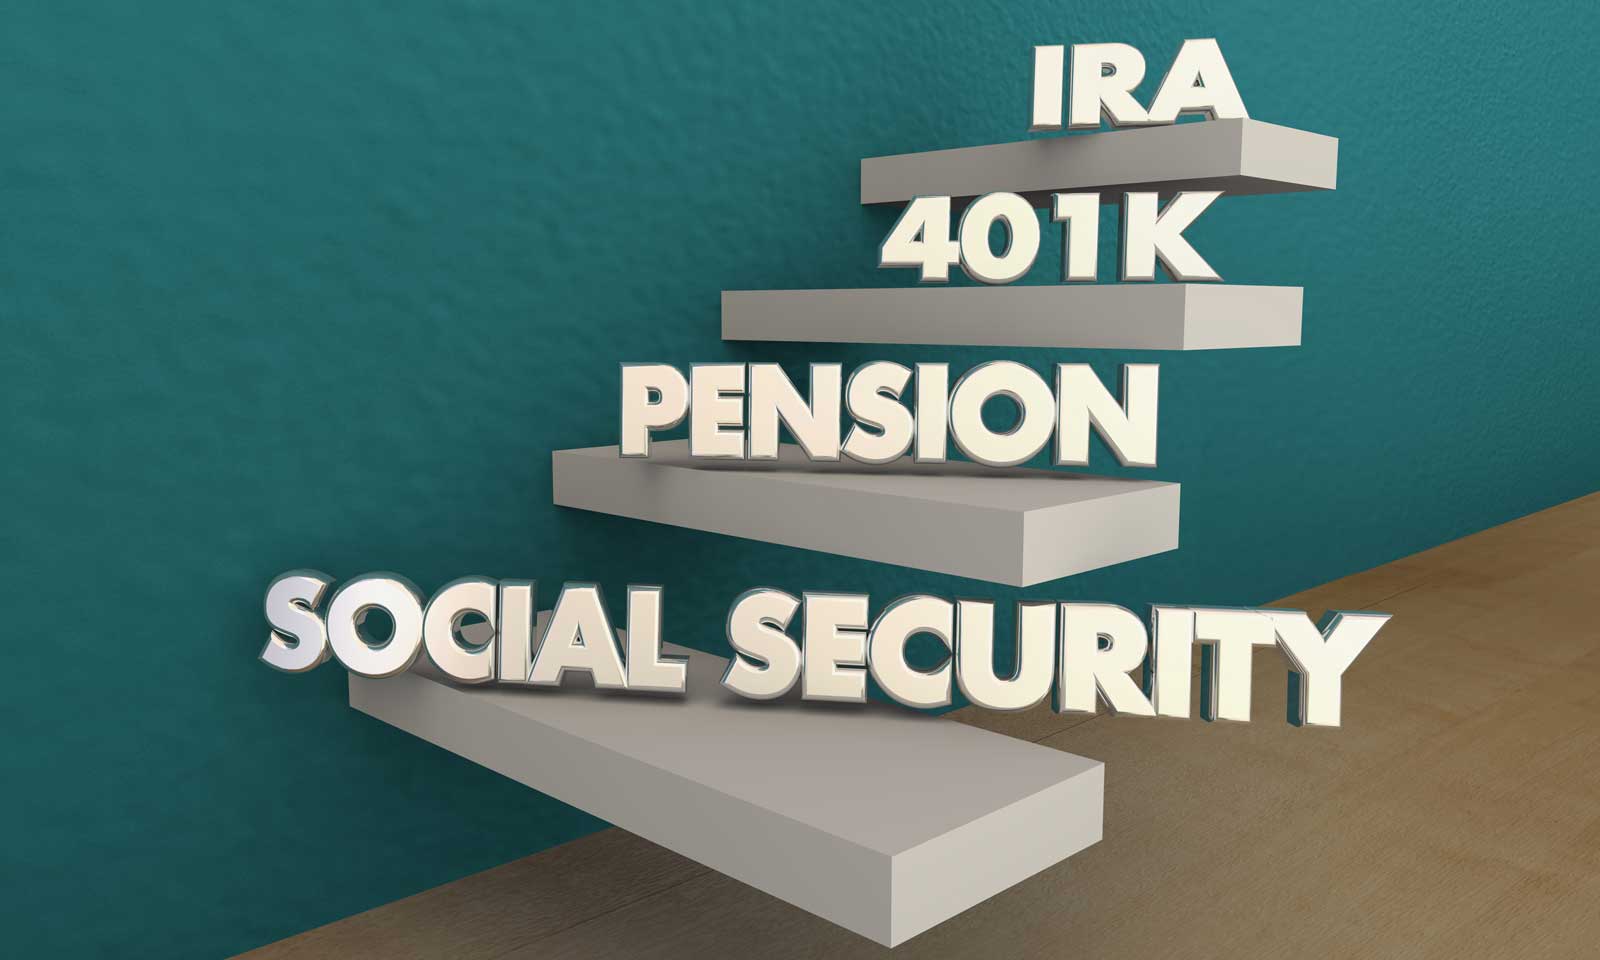 How Will Working Affect Social Security Benefits? | IRA | 401K | Pension | Social Security